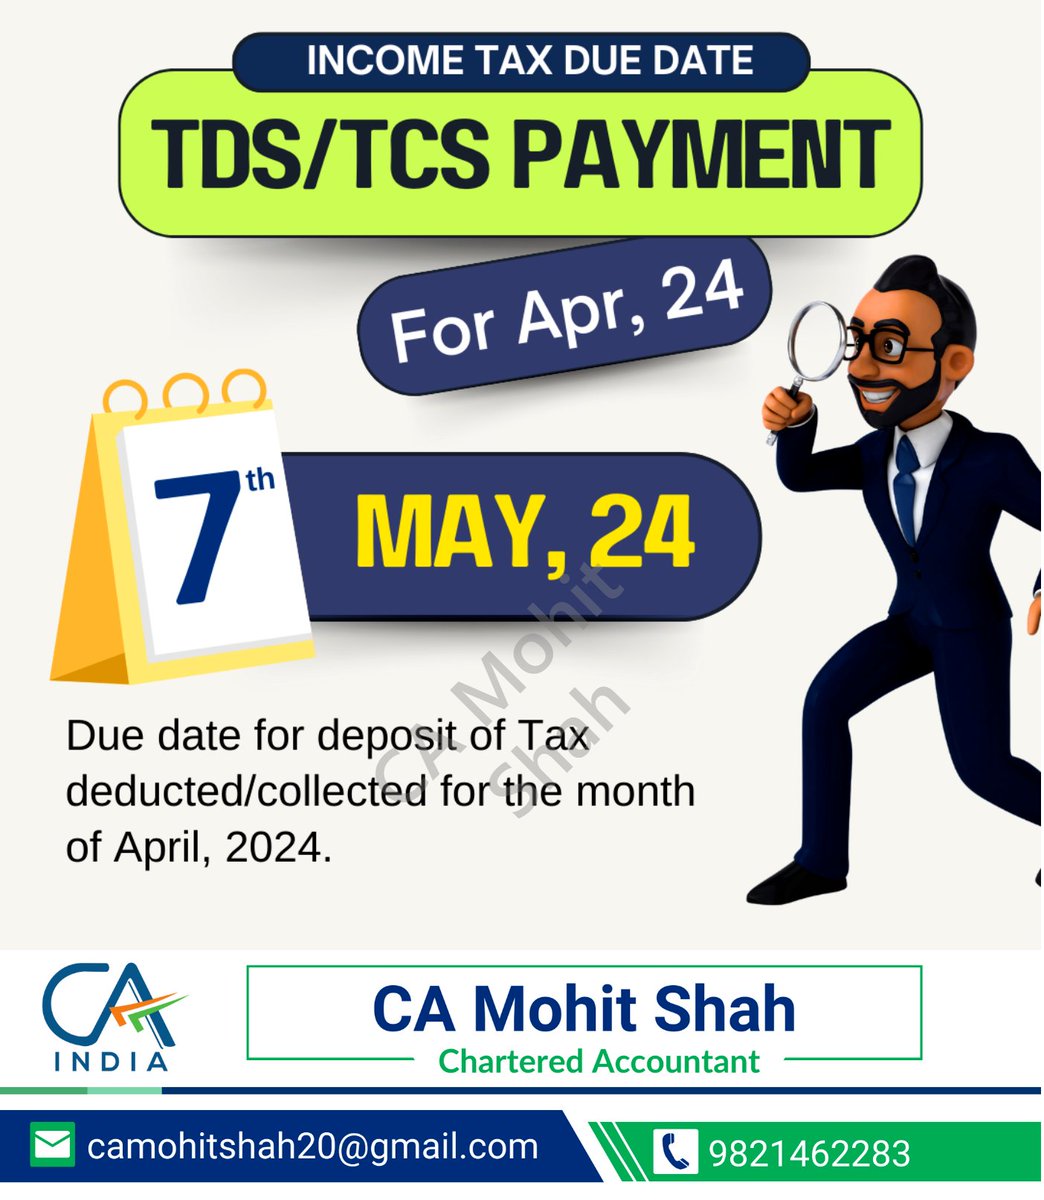 Attention taxpayers! Don't forget to deposit Tax Deducted/Collected for the month of April 2024 by the due date to avoid penalties.

#TaxCompliance #TDS #TCSPayment #IncomeTaxIndia #TaxFiling #FinanceProfessionals #GSTCompliance #DigitalIndia #FinancialServices #TaxSeason